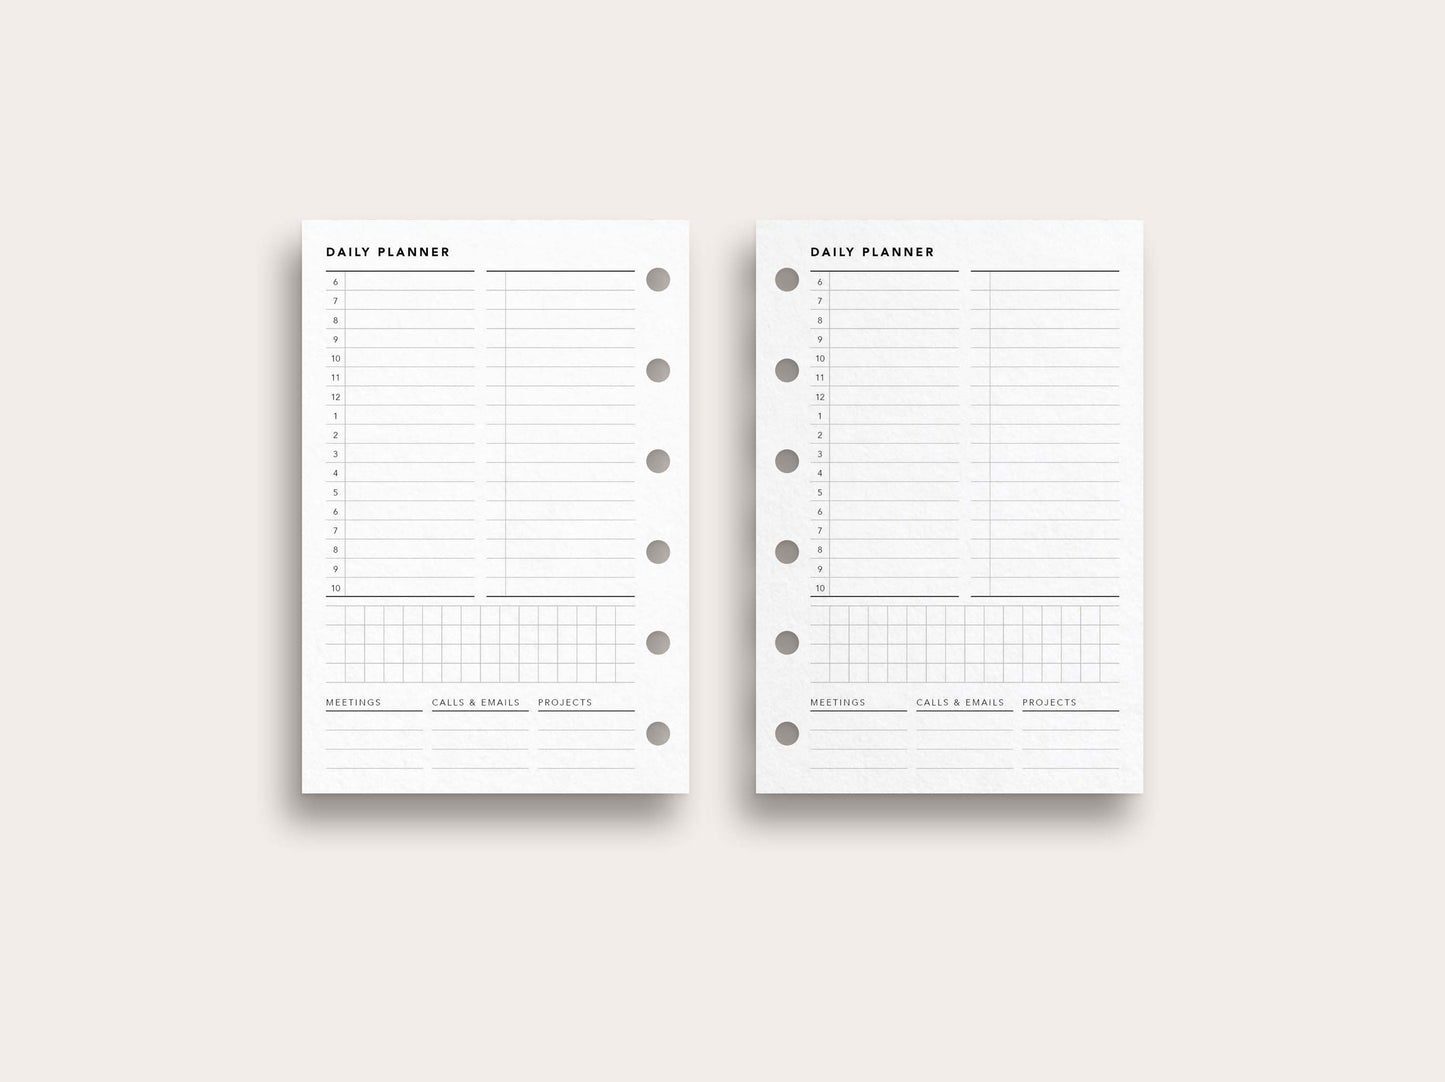 Daily Planner No. 2